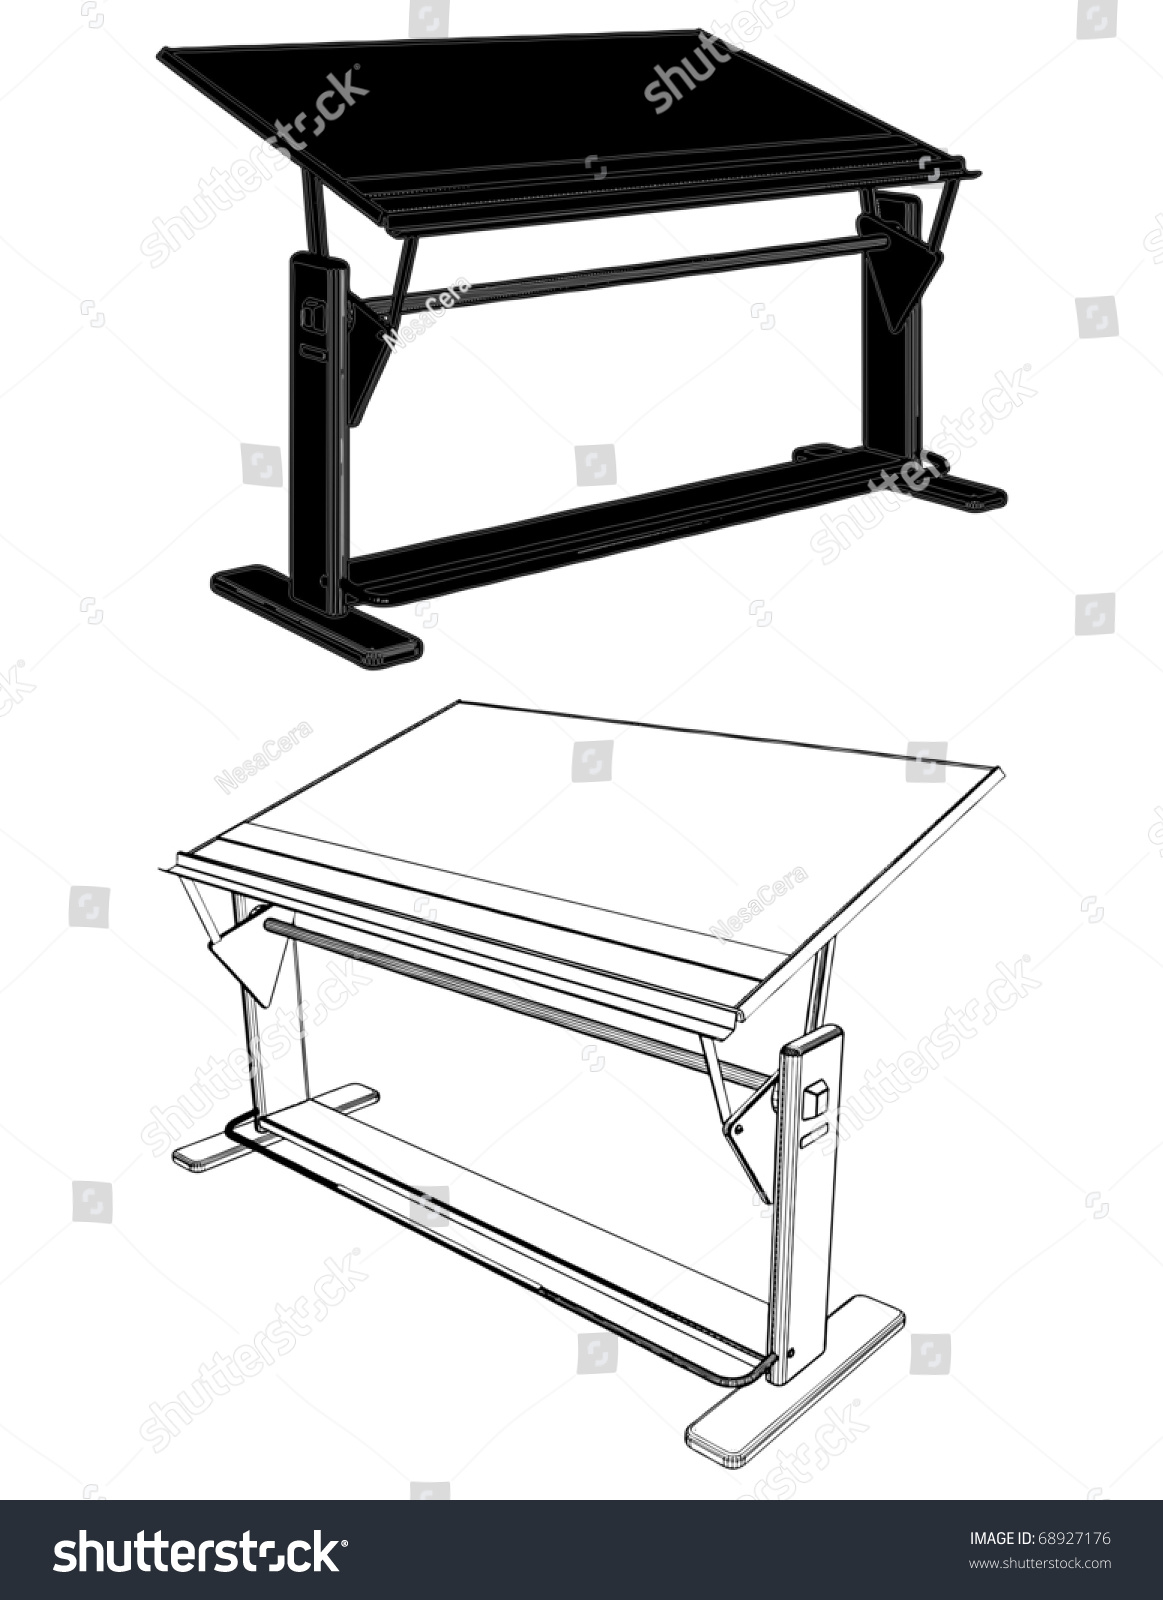 Drawing Table Vector 04 - 68927176 : Shutterstock